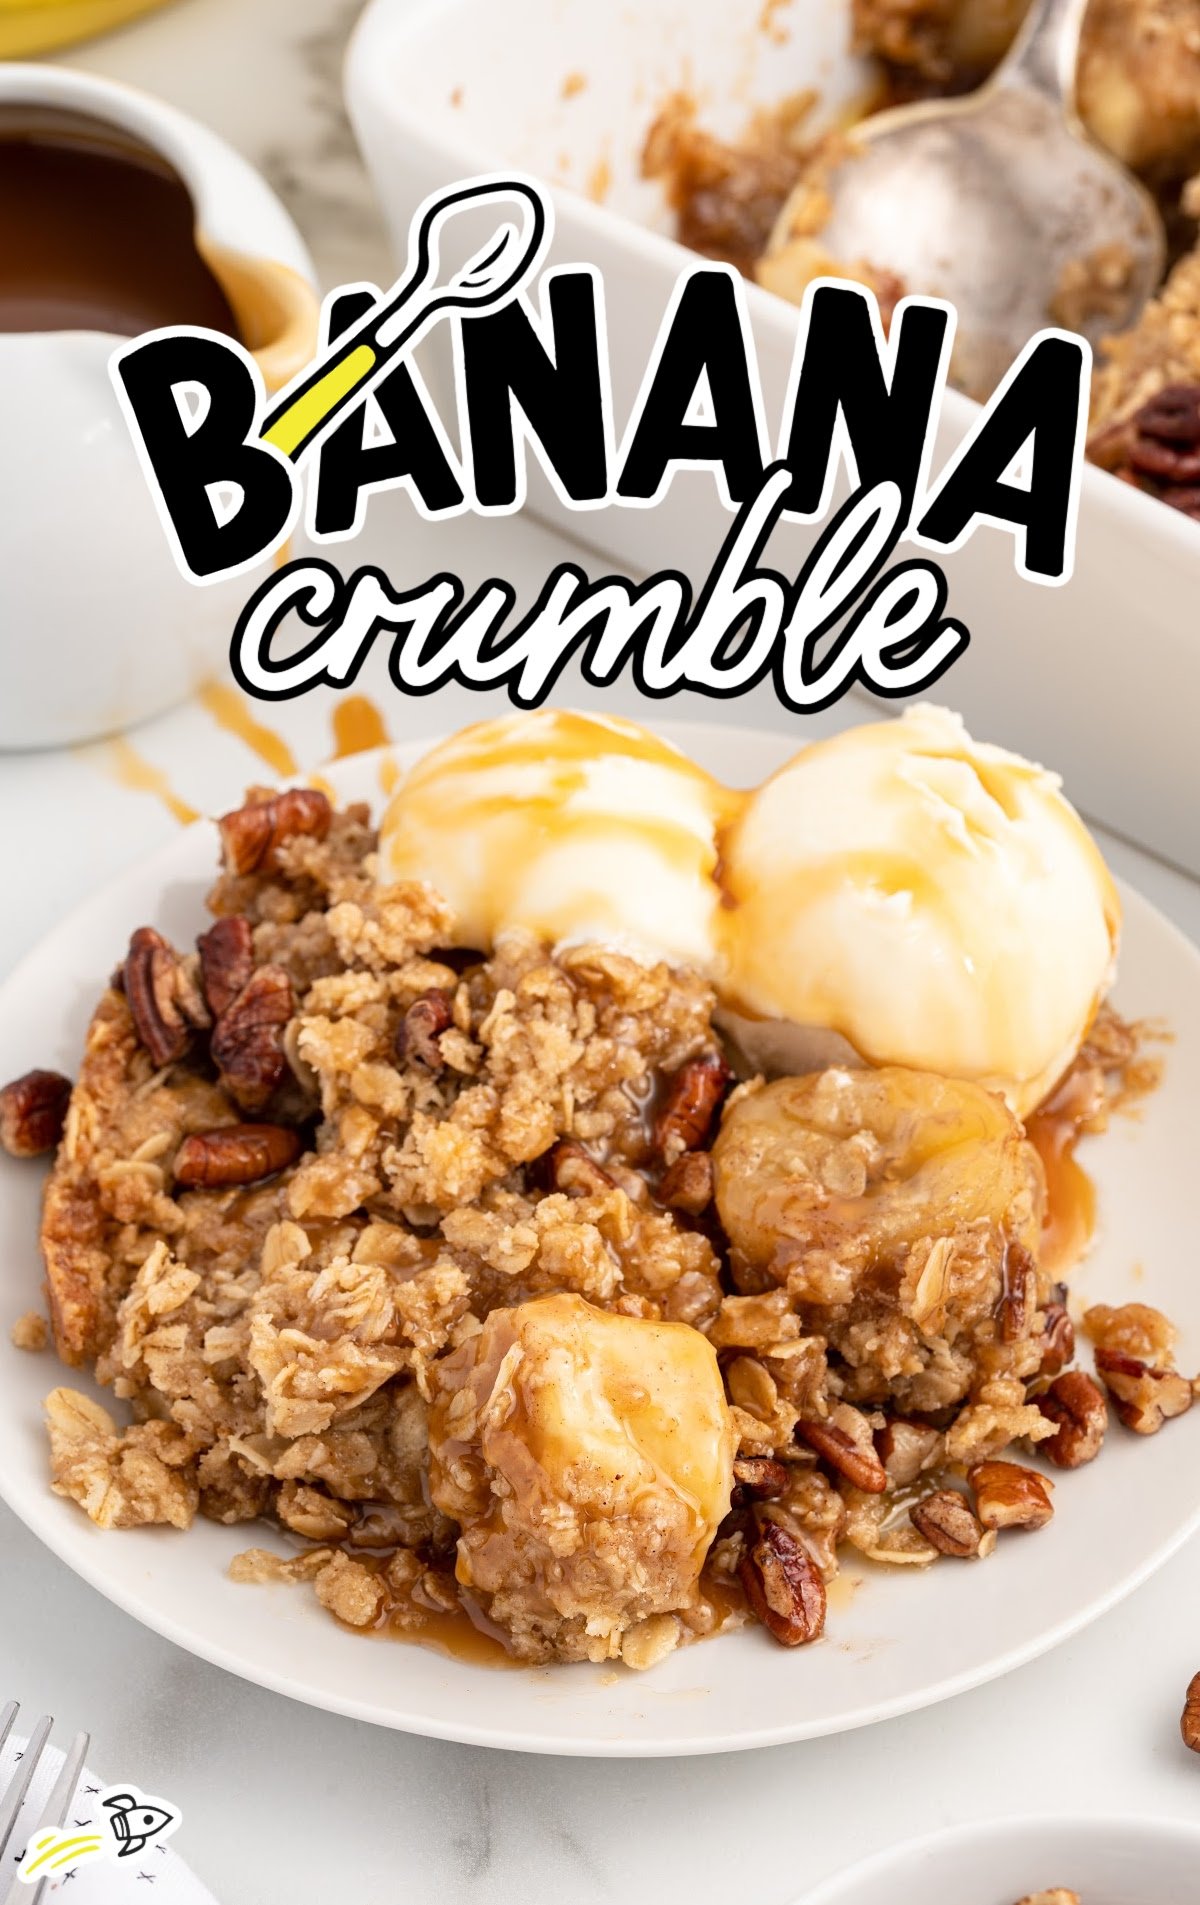 banana crumble with ice cream and caramel sauce on a plate